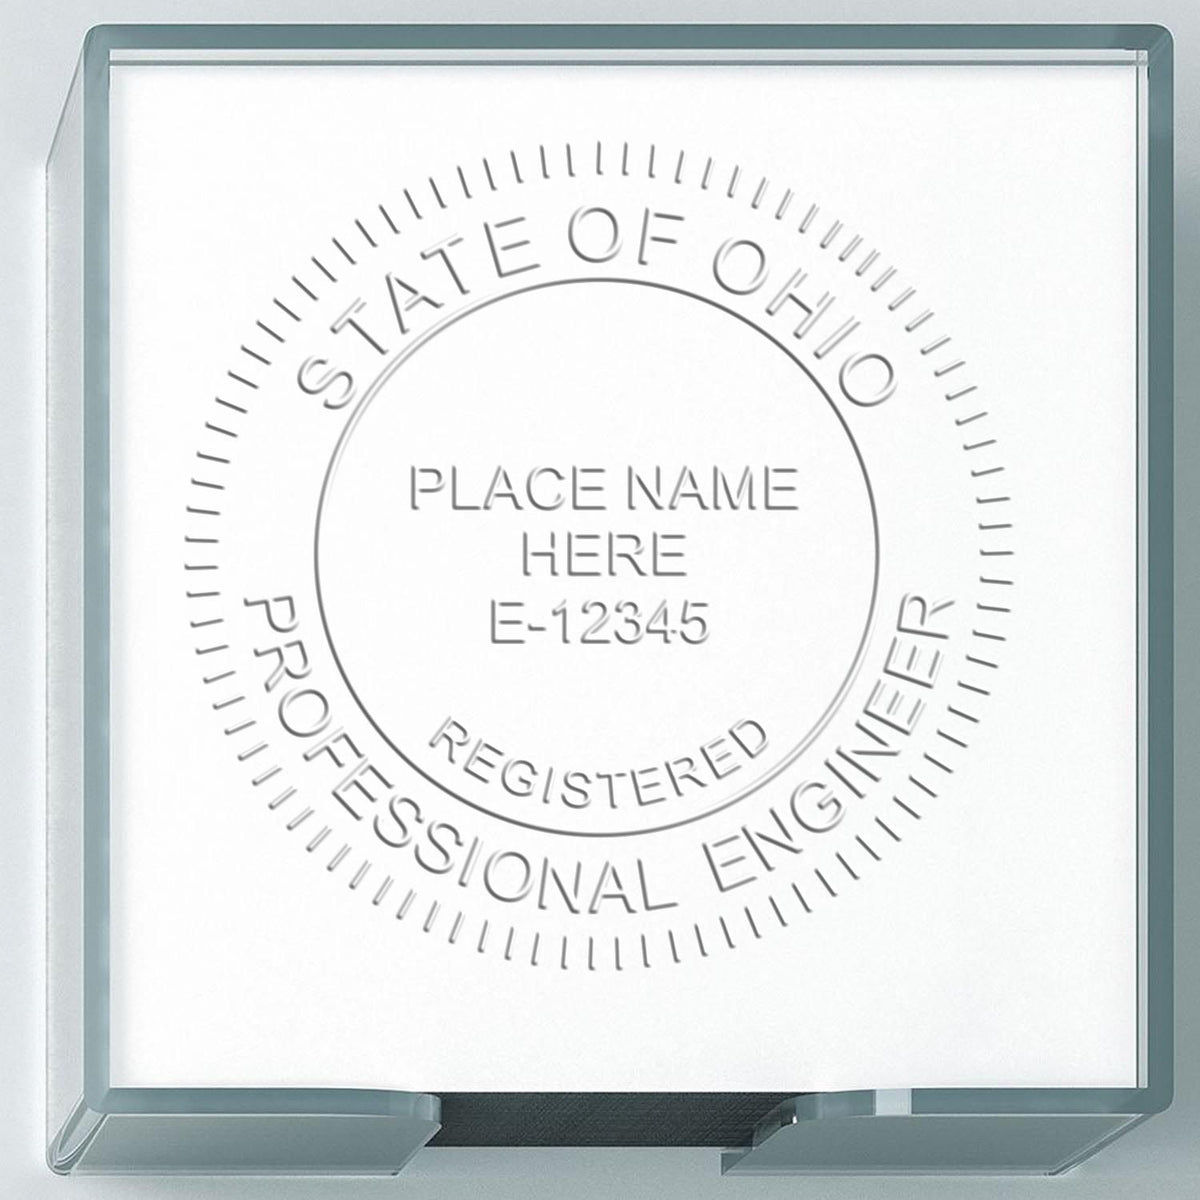 A stamped impression of the Handheld Ohio Professional Engineer Embosser in this stylish lifestyle photo, setting the tone for a unique and personalized product.